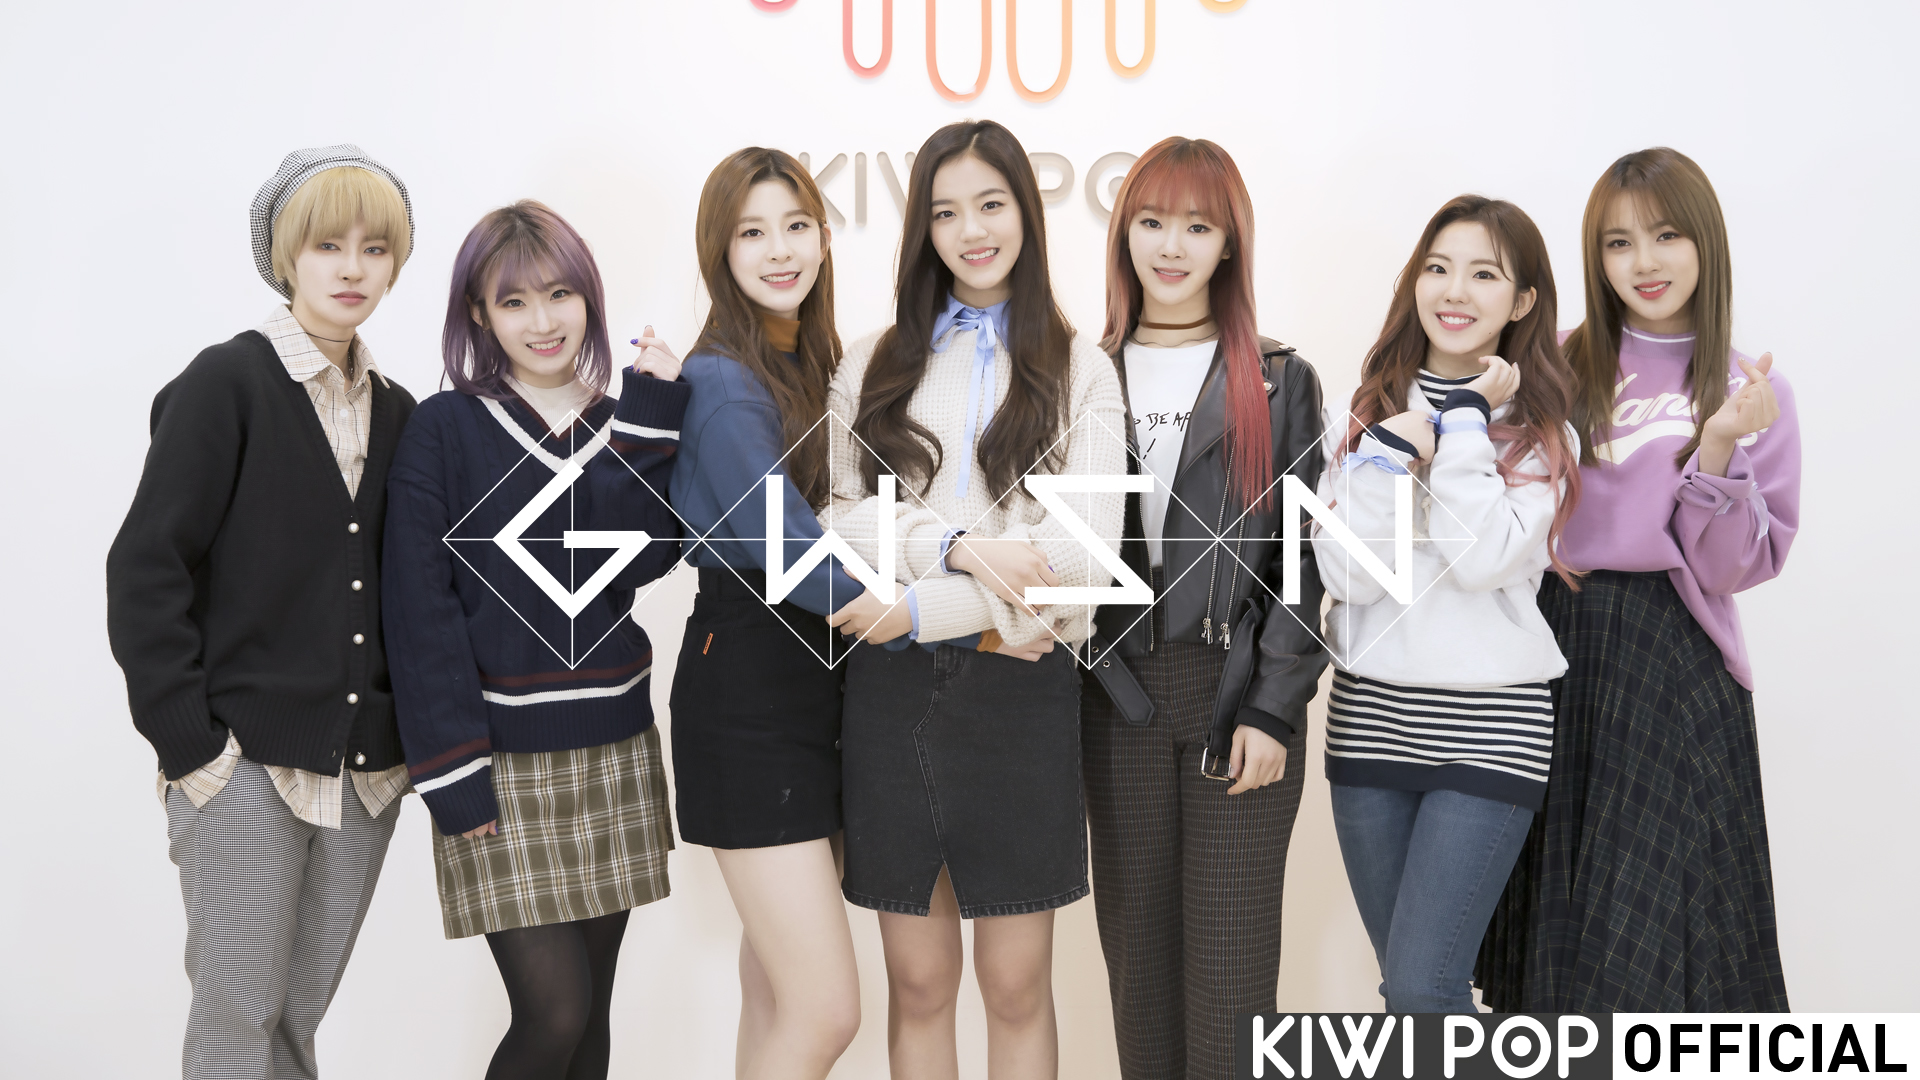 [GWSN]The New Year’s greetings from Girls in the Park!